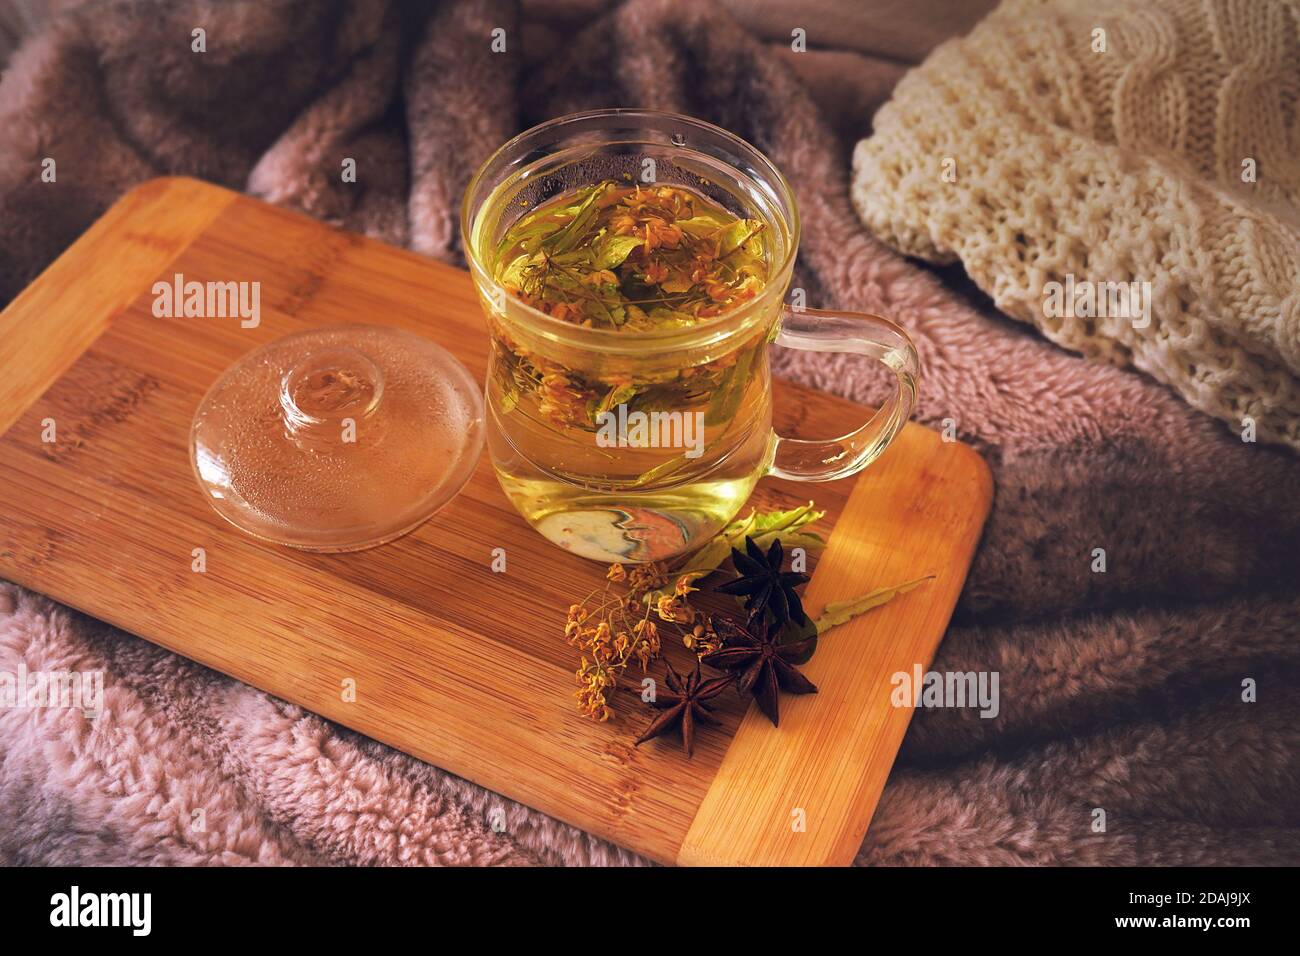 Linden tea on a chopping board with some herbs around. Cozy home felling. Stock Photo